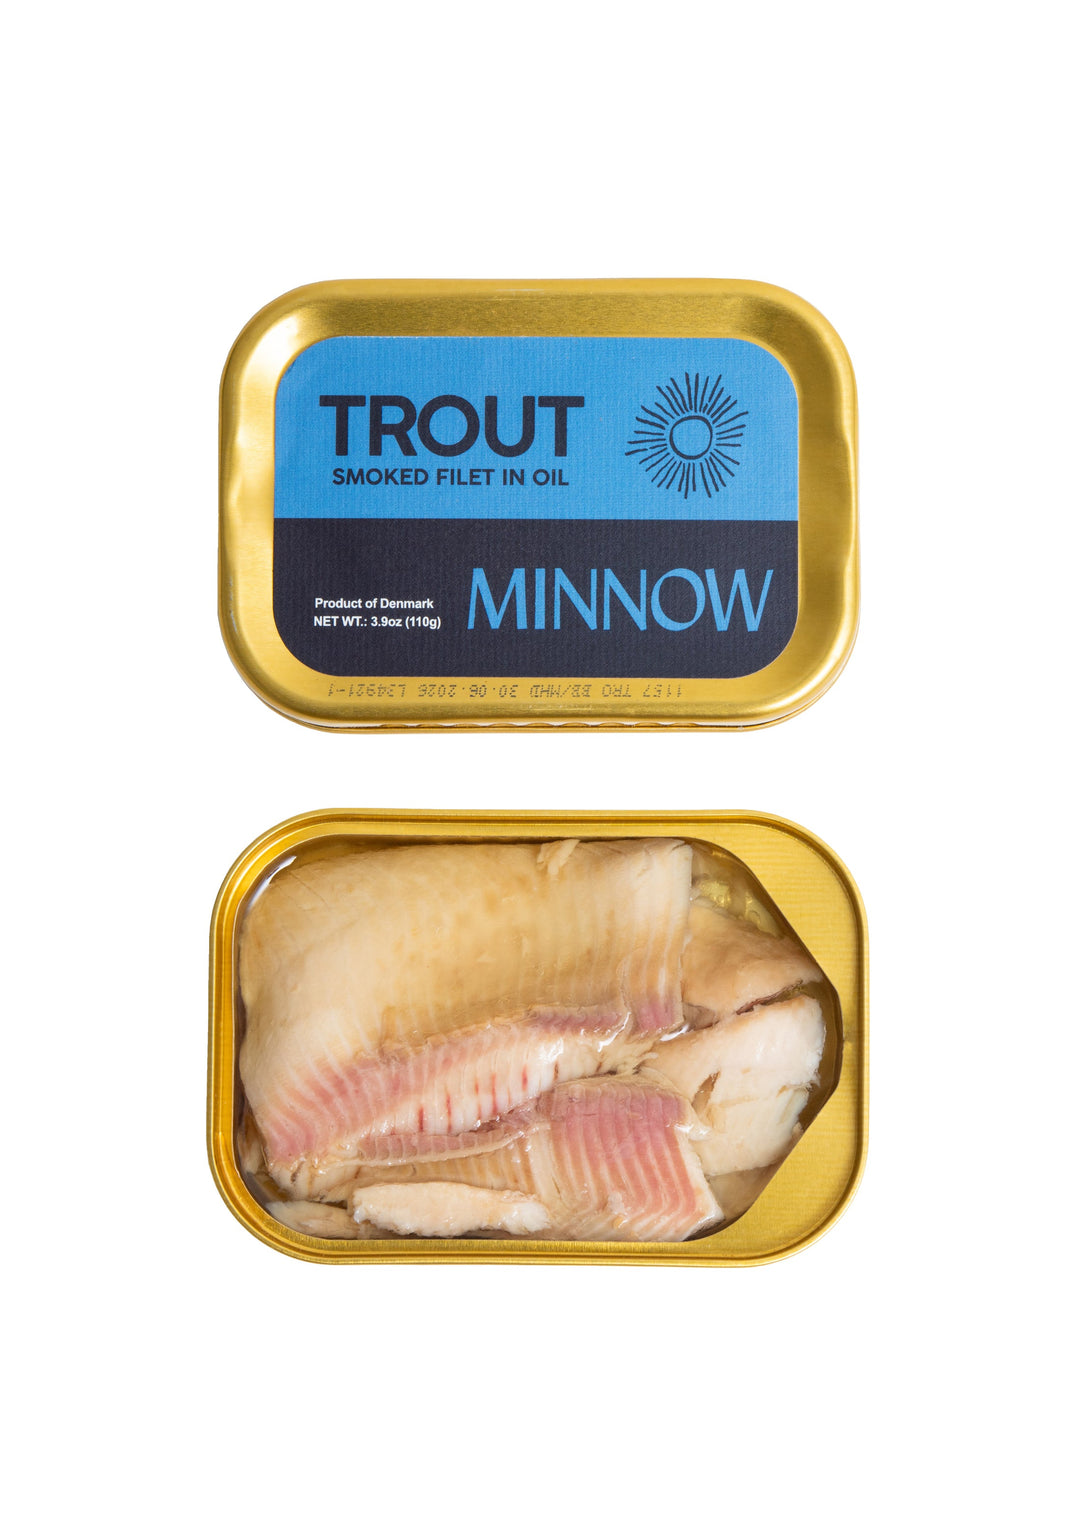 Minnow Smoked Trout Fillets